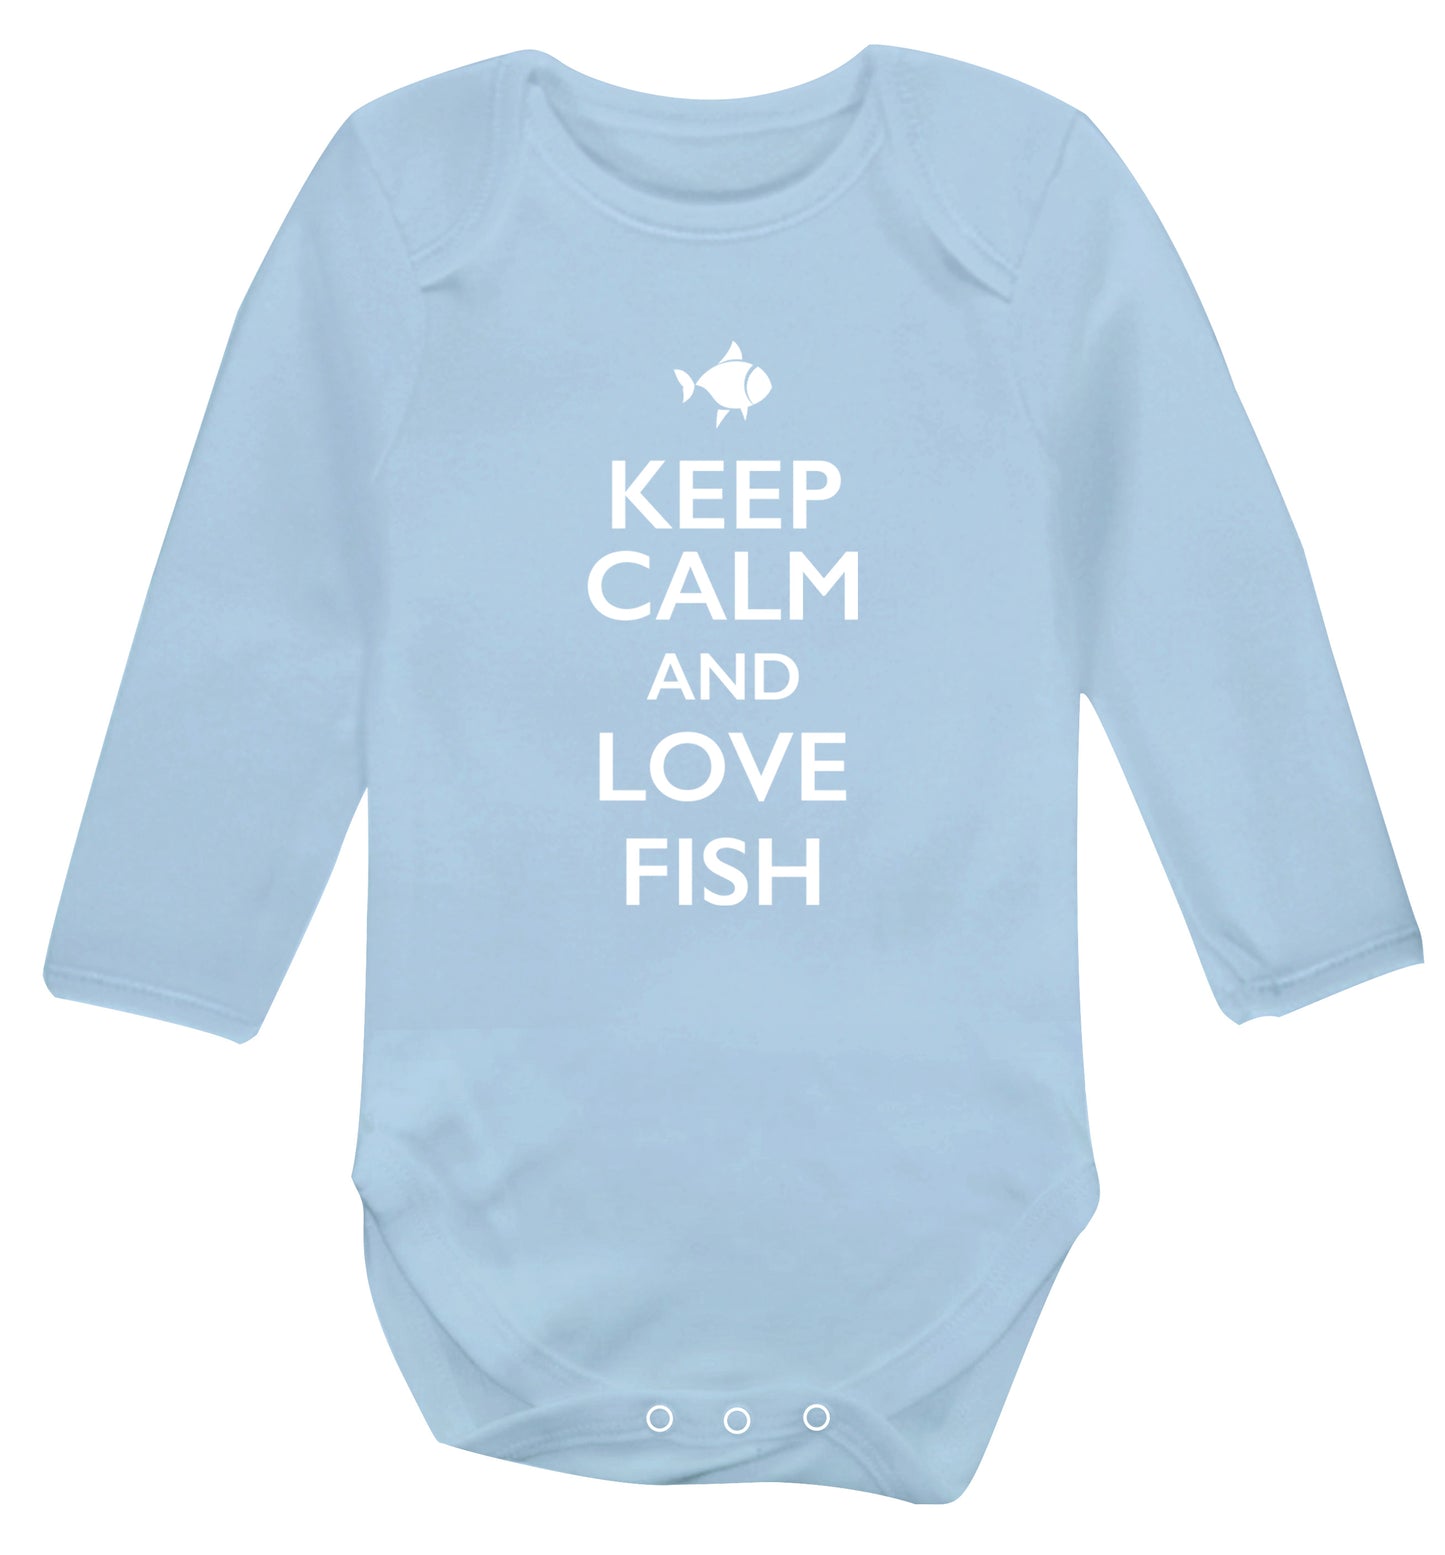 Keep calm and love fish Baby Vest long sleeved pale blue 6-12 months